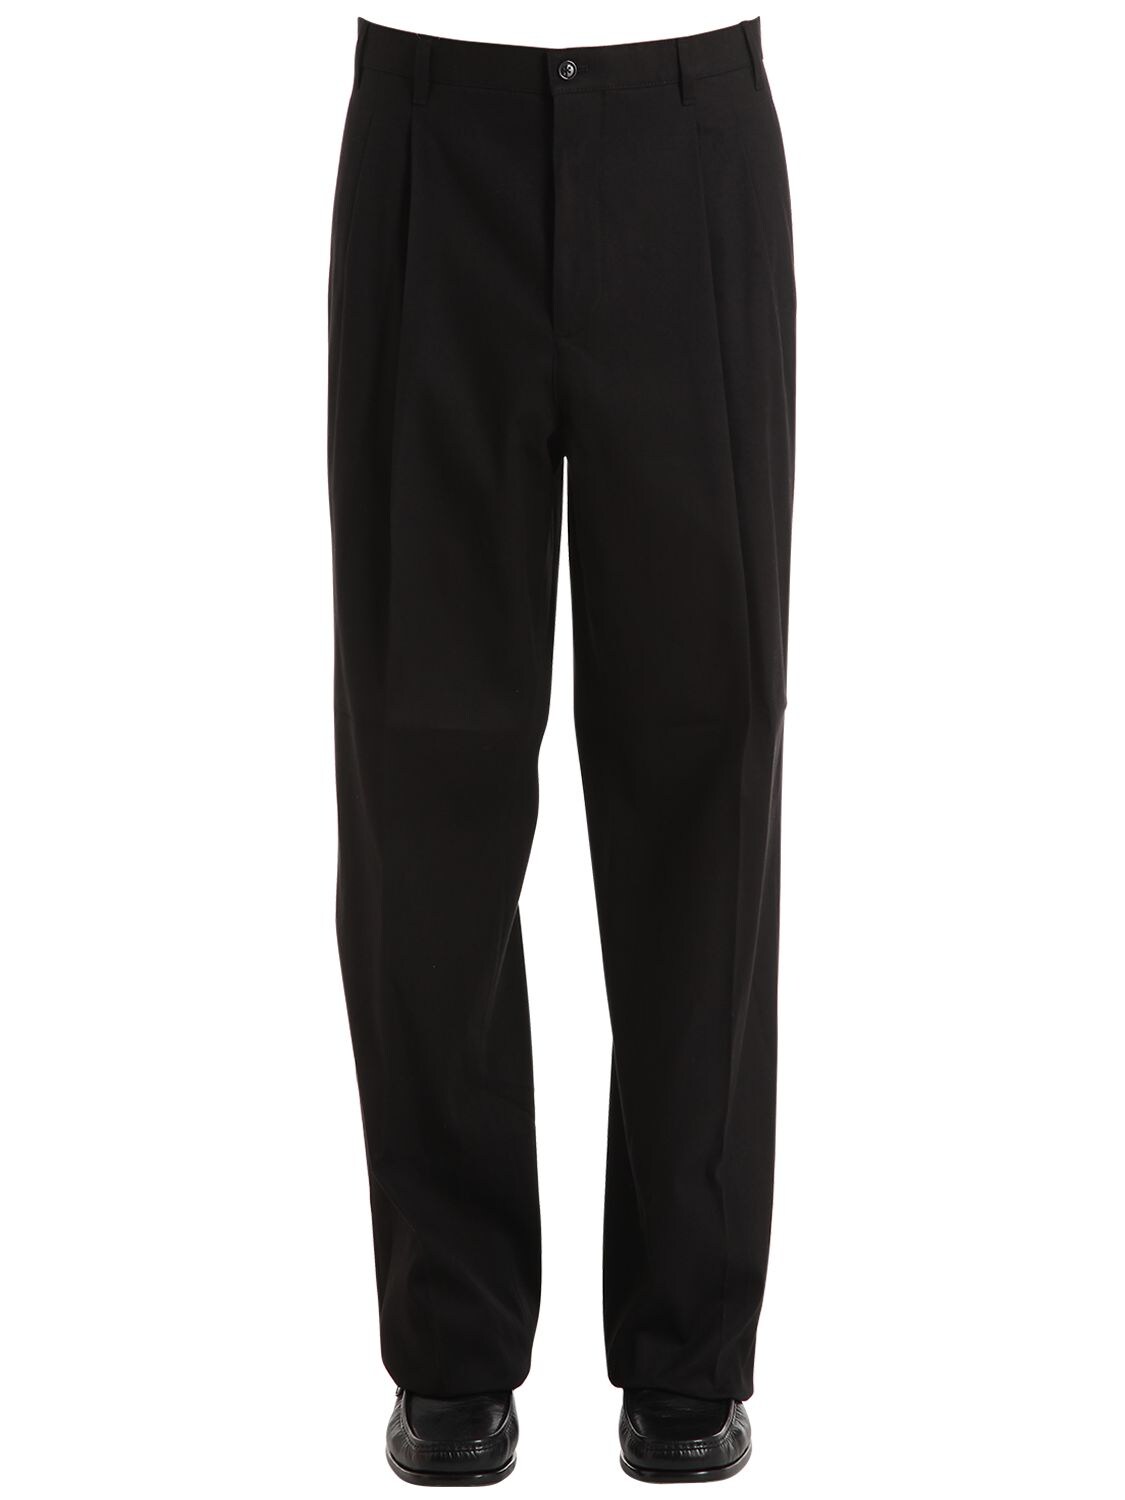 Raf Simons Cotton Chino Pants W/ Tape On Back In Black